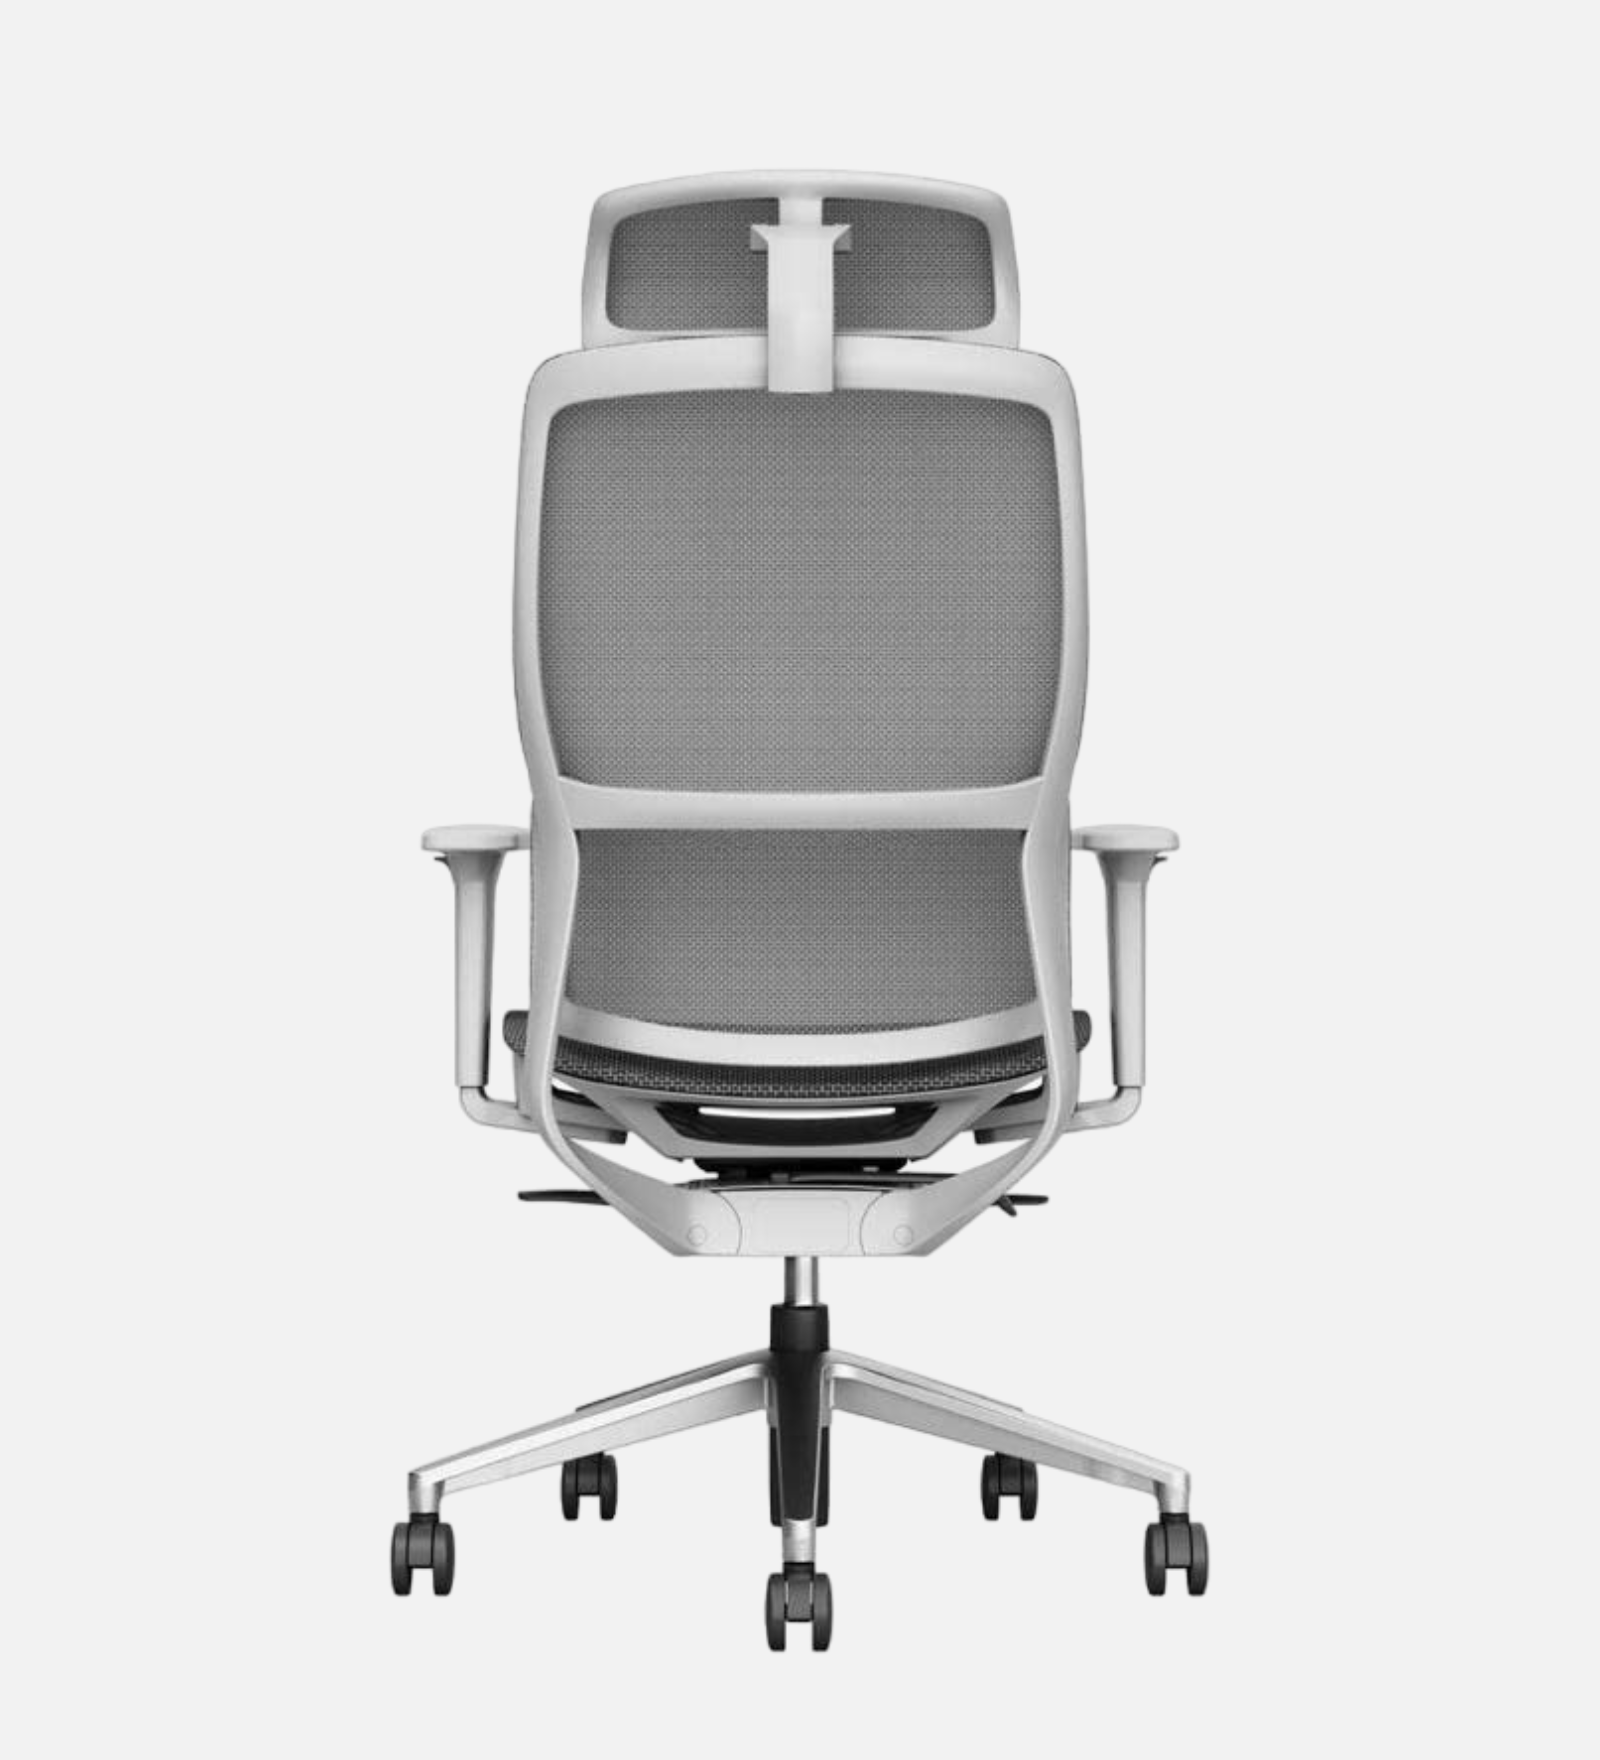 Wave 135° Tilt angle High Back Ergonomic Office Chair With Mesh Seat, 3D Armrest And Aluminum Base with Nylon Castors- Grey